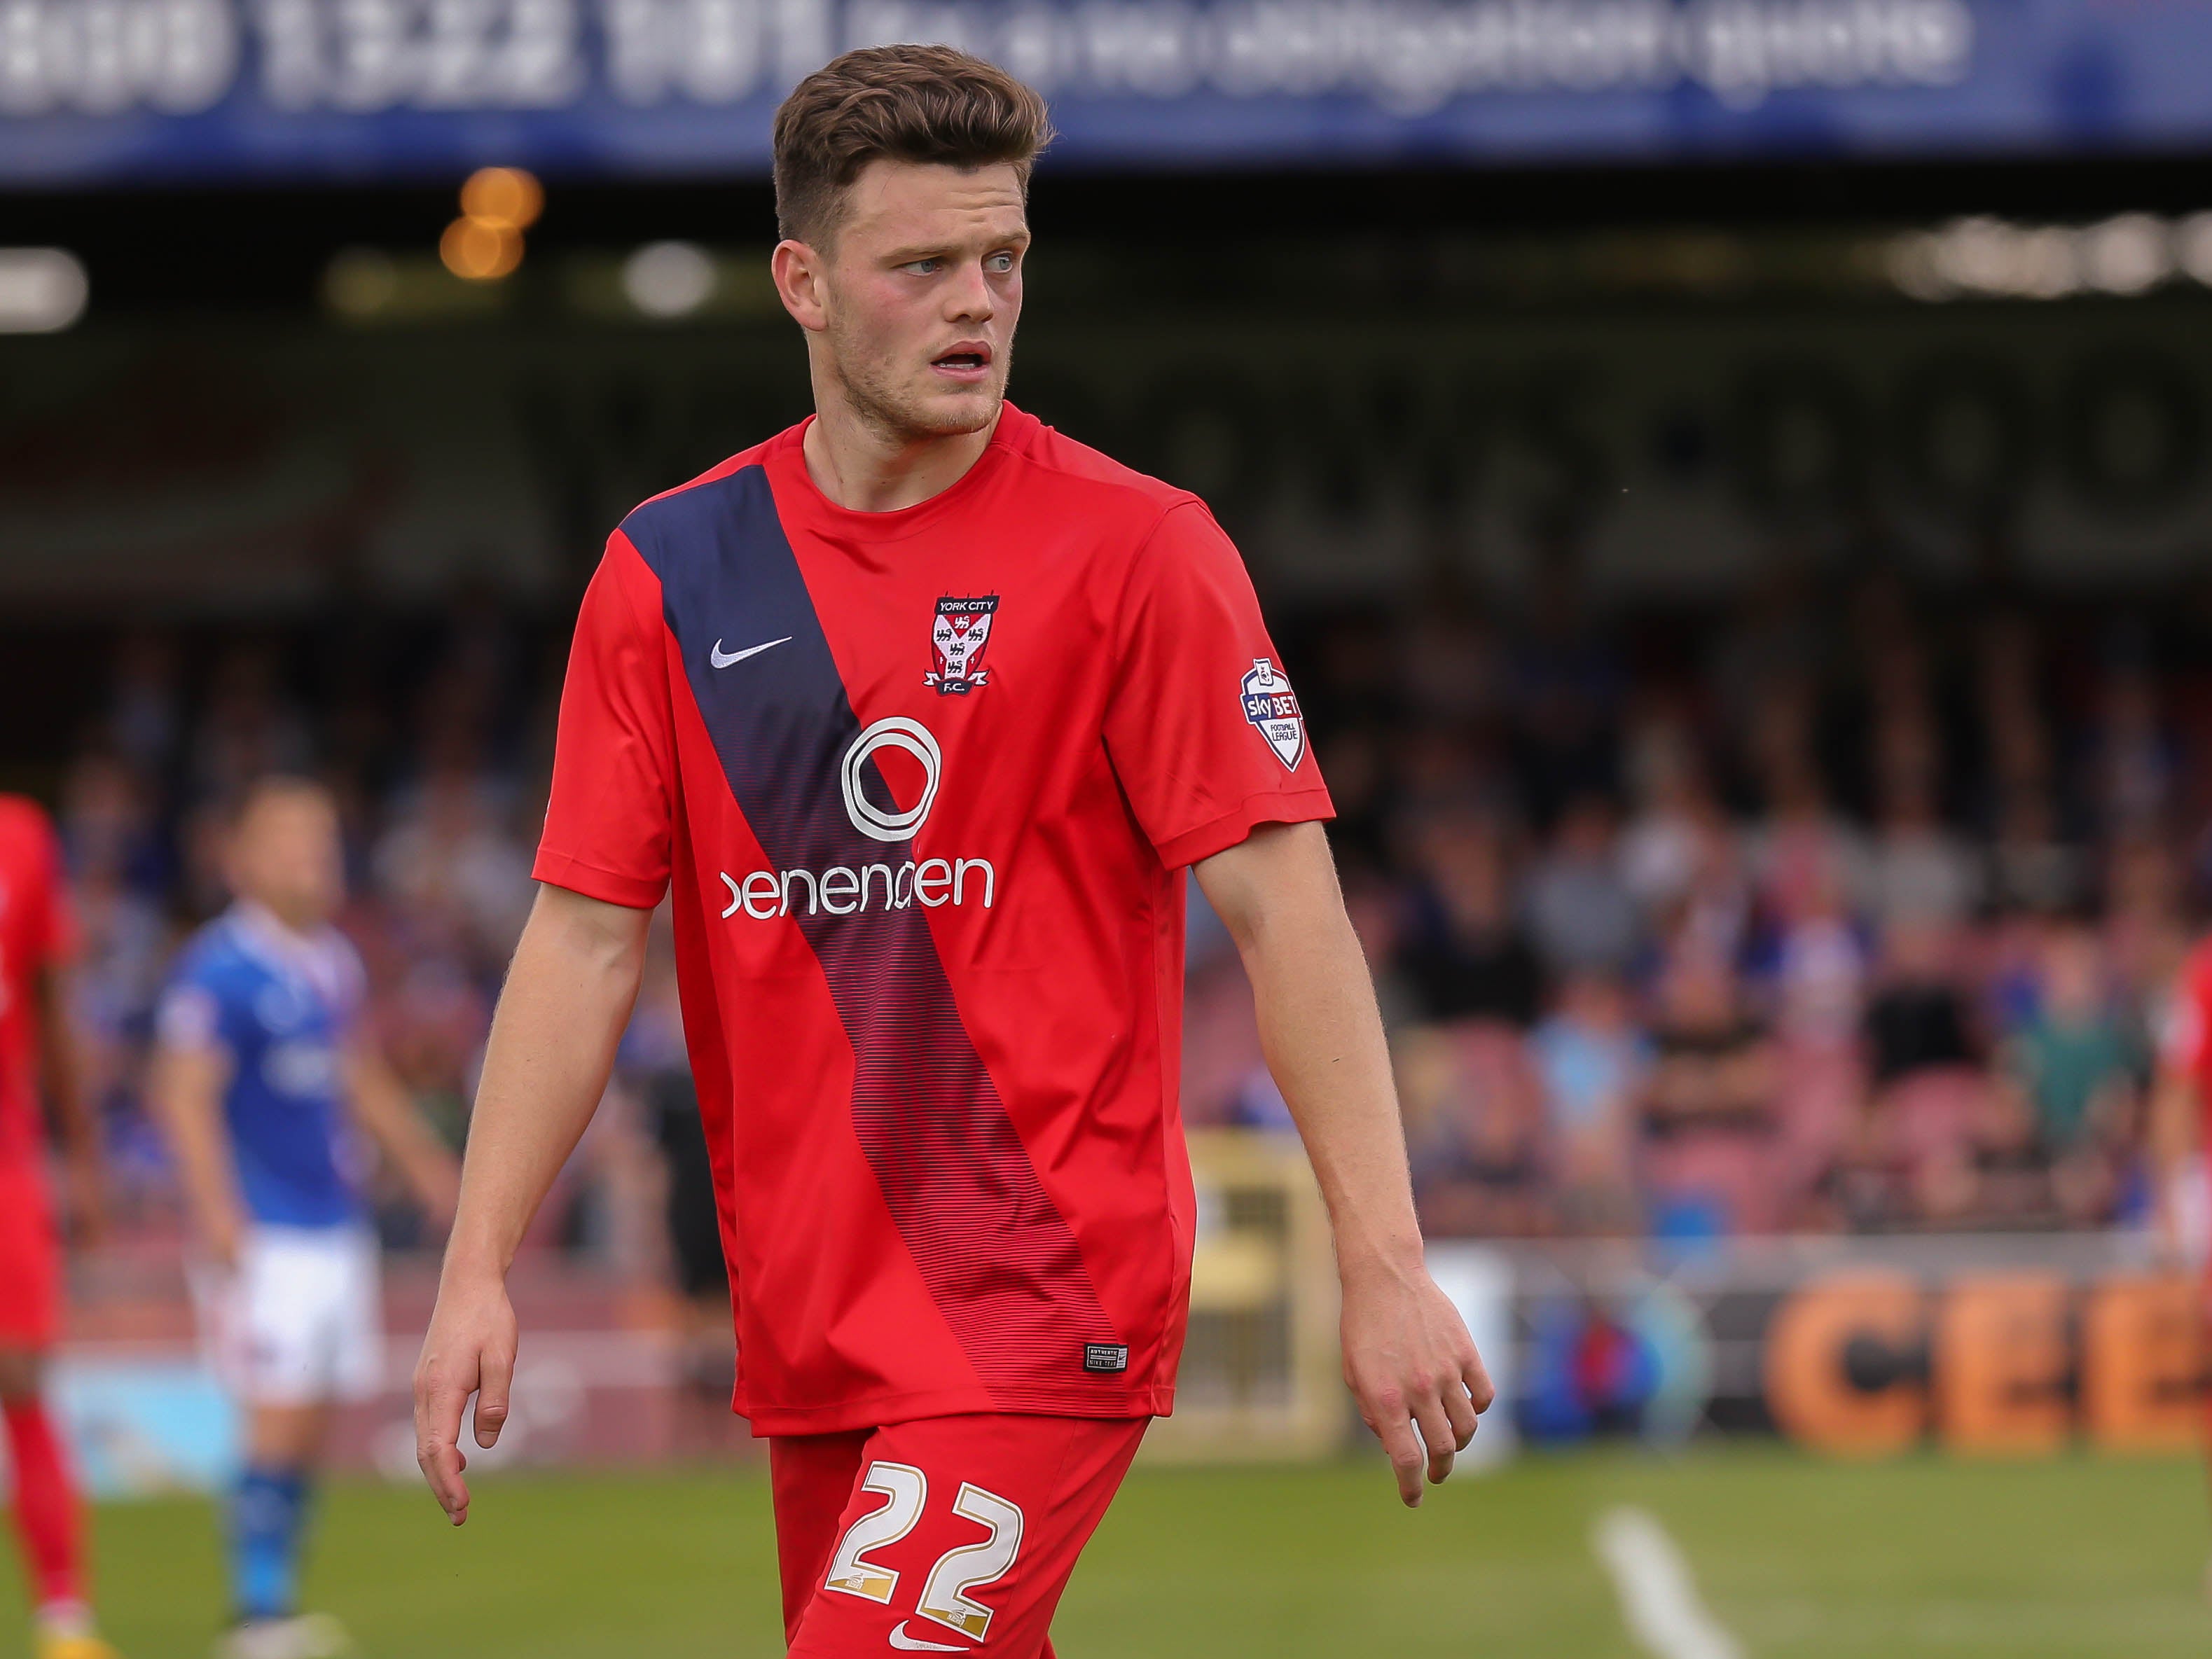 Reece Thompson features for York City in 2015